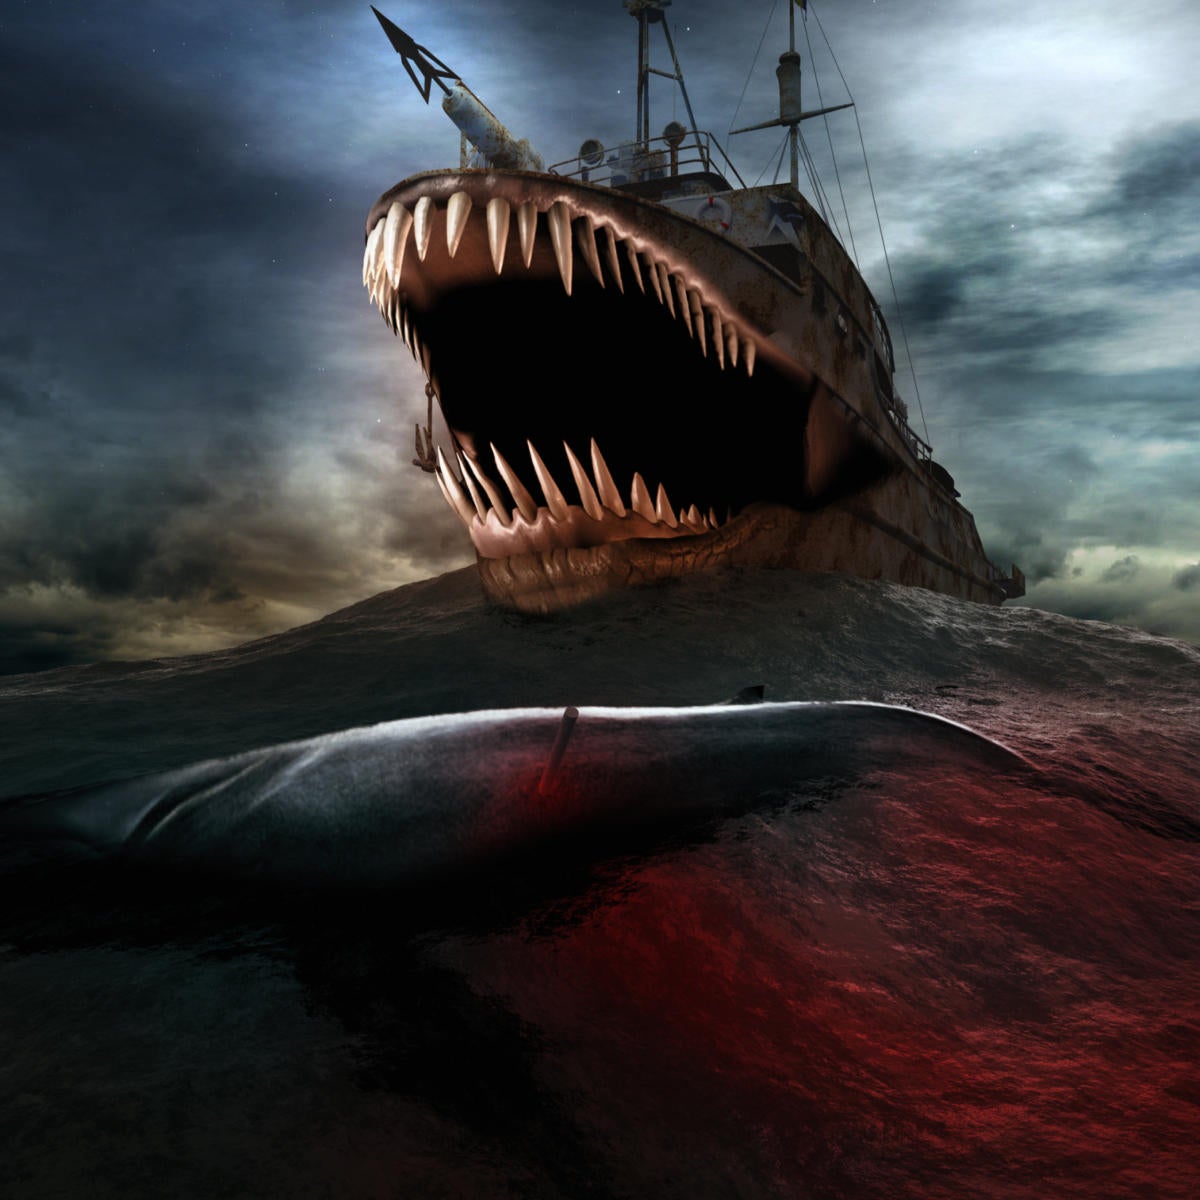 Whaling emerges as major cybersecurity threat CIO